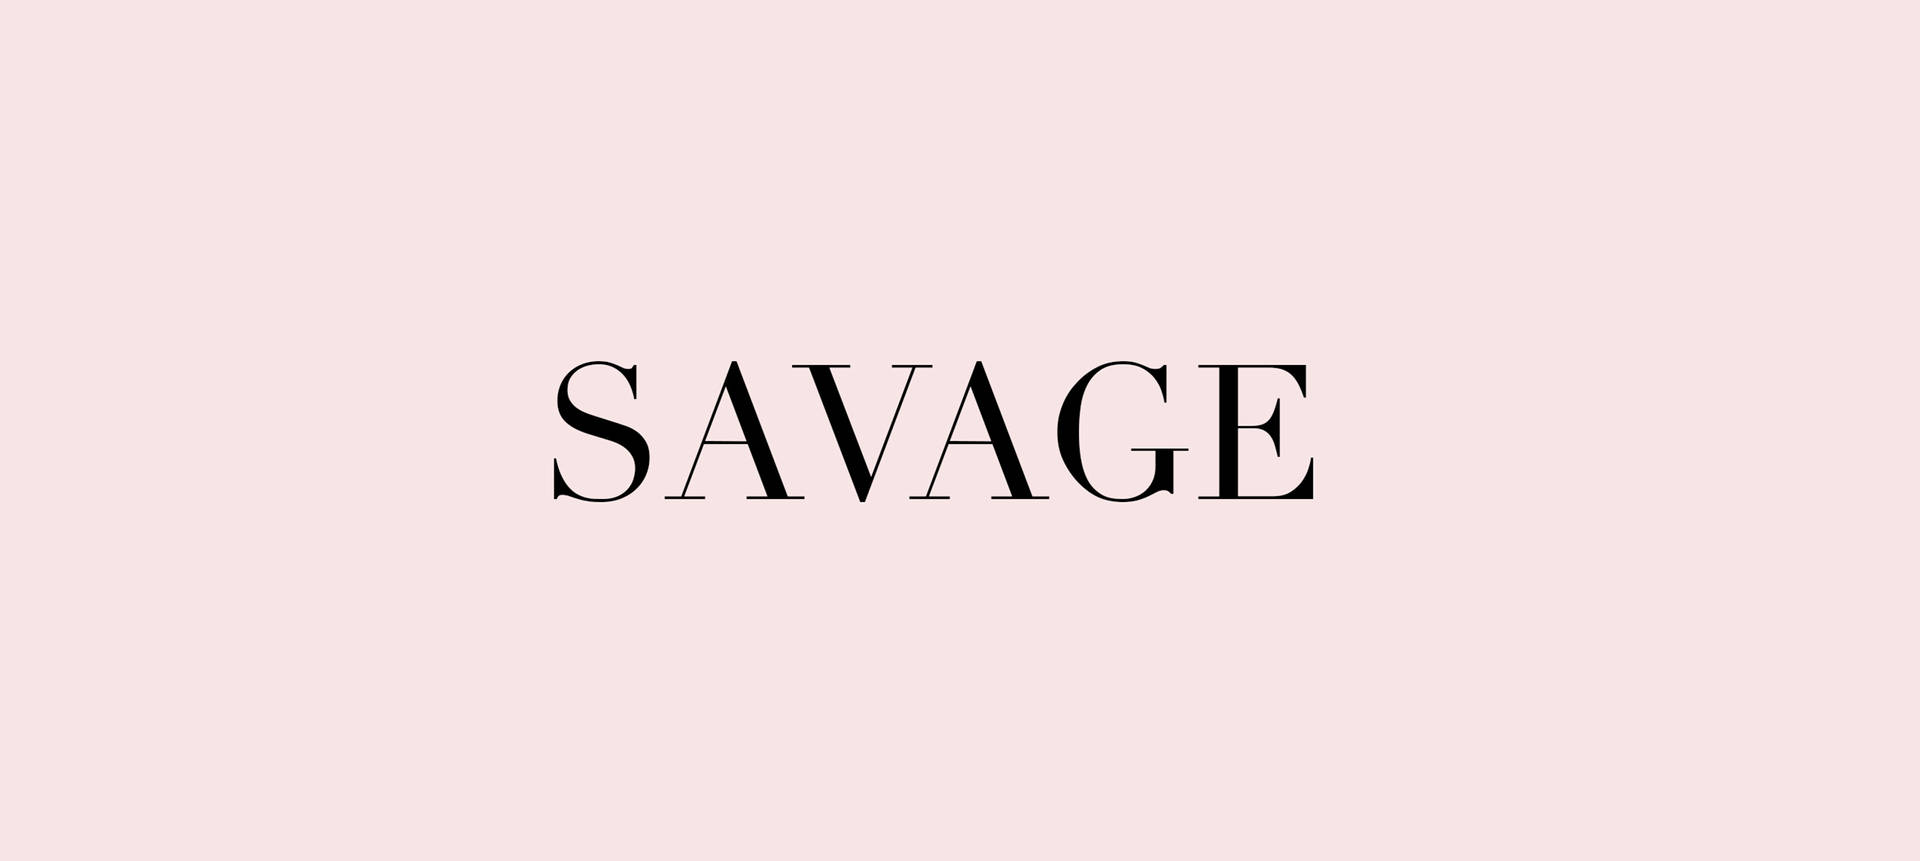 Savage By Nature added a new photo. - Savage By Nature